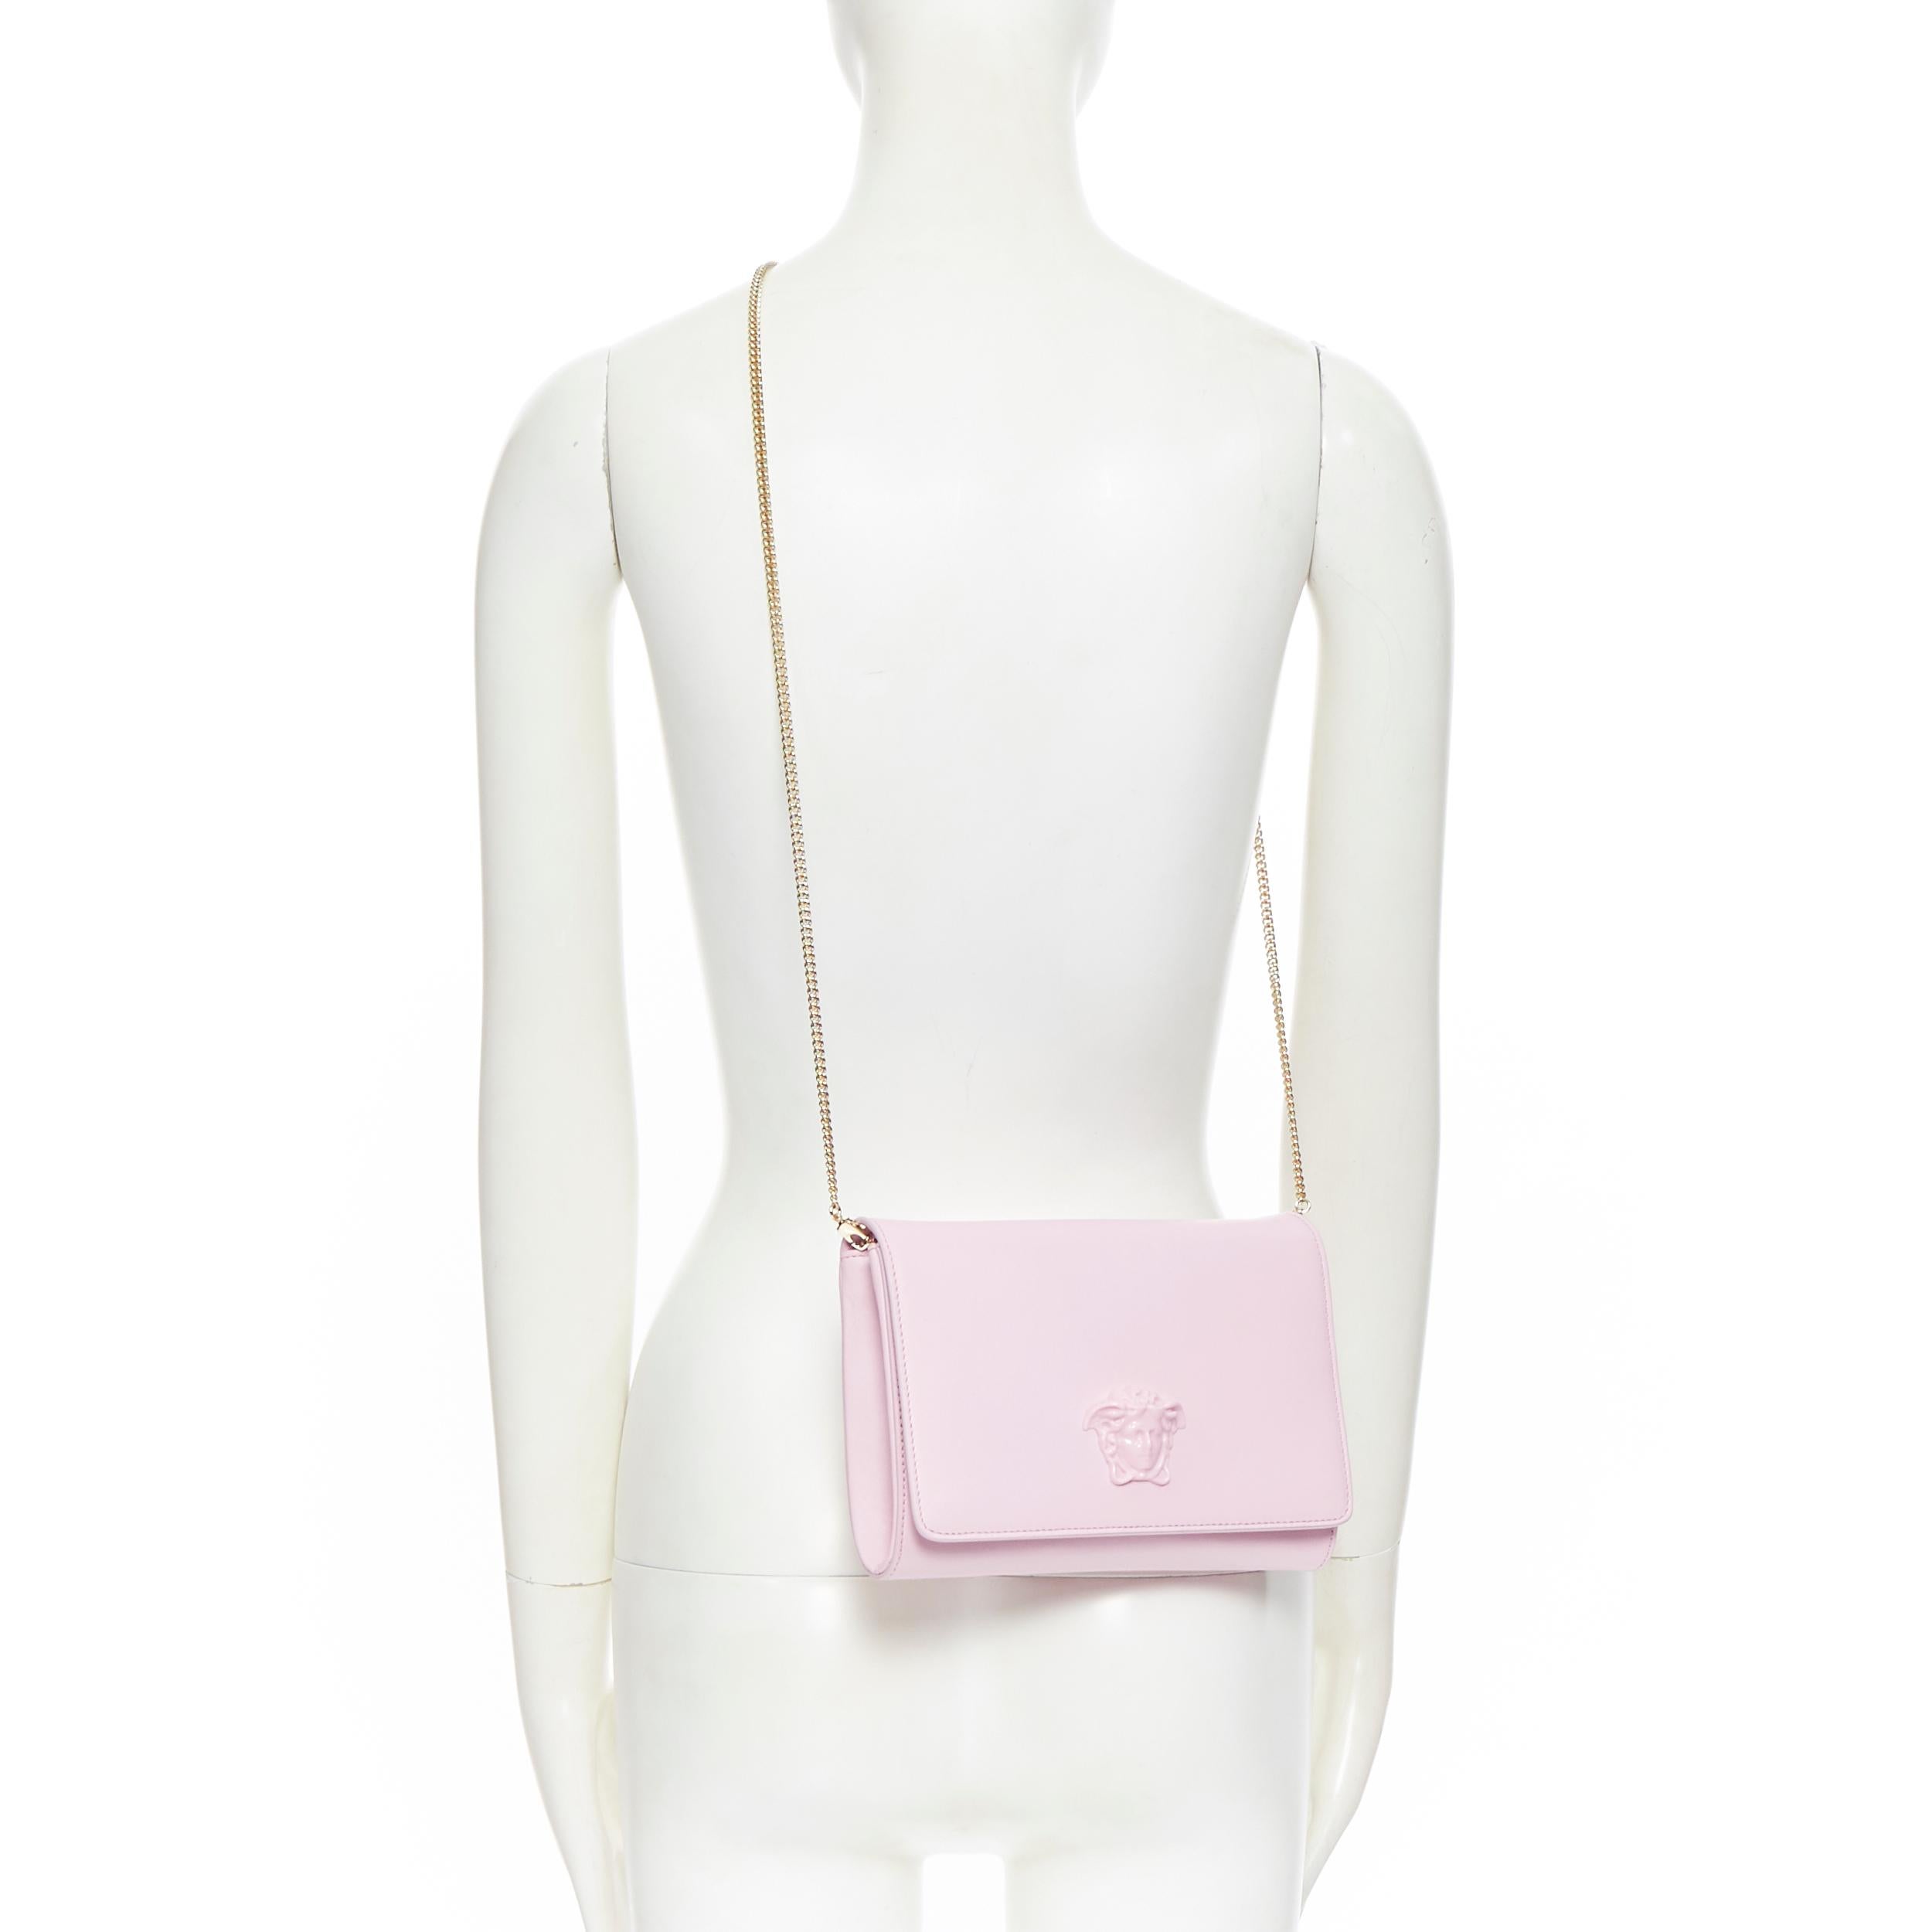 new VERSACE Palazzo Medusa light pink leather flap chain shoulder bag clutch
Brand: Versace
Designer: Donatella Versace
Model Name / Style: Palazzo Medusa
Material: Leather
Color: Pink
Pattern: Solid
Closure: Magnetic
Extra Detail: Calf leather